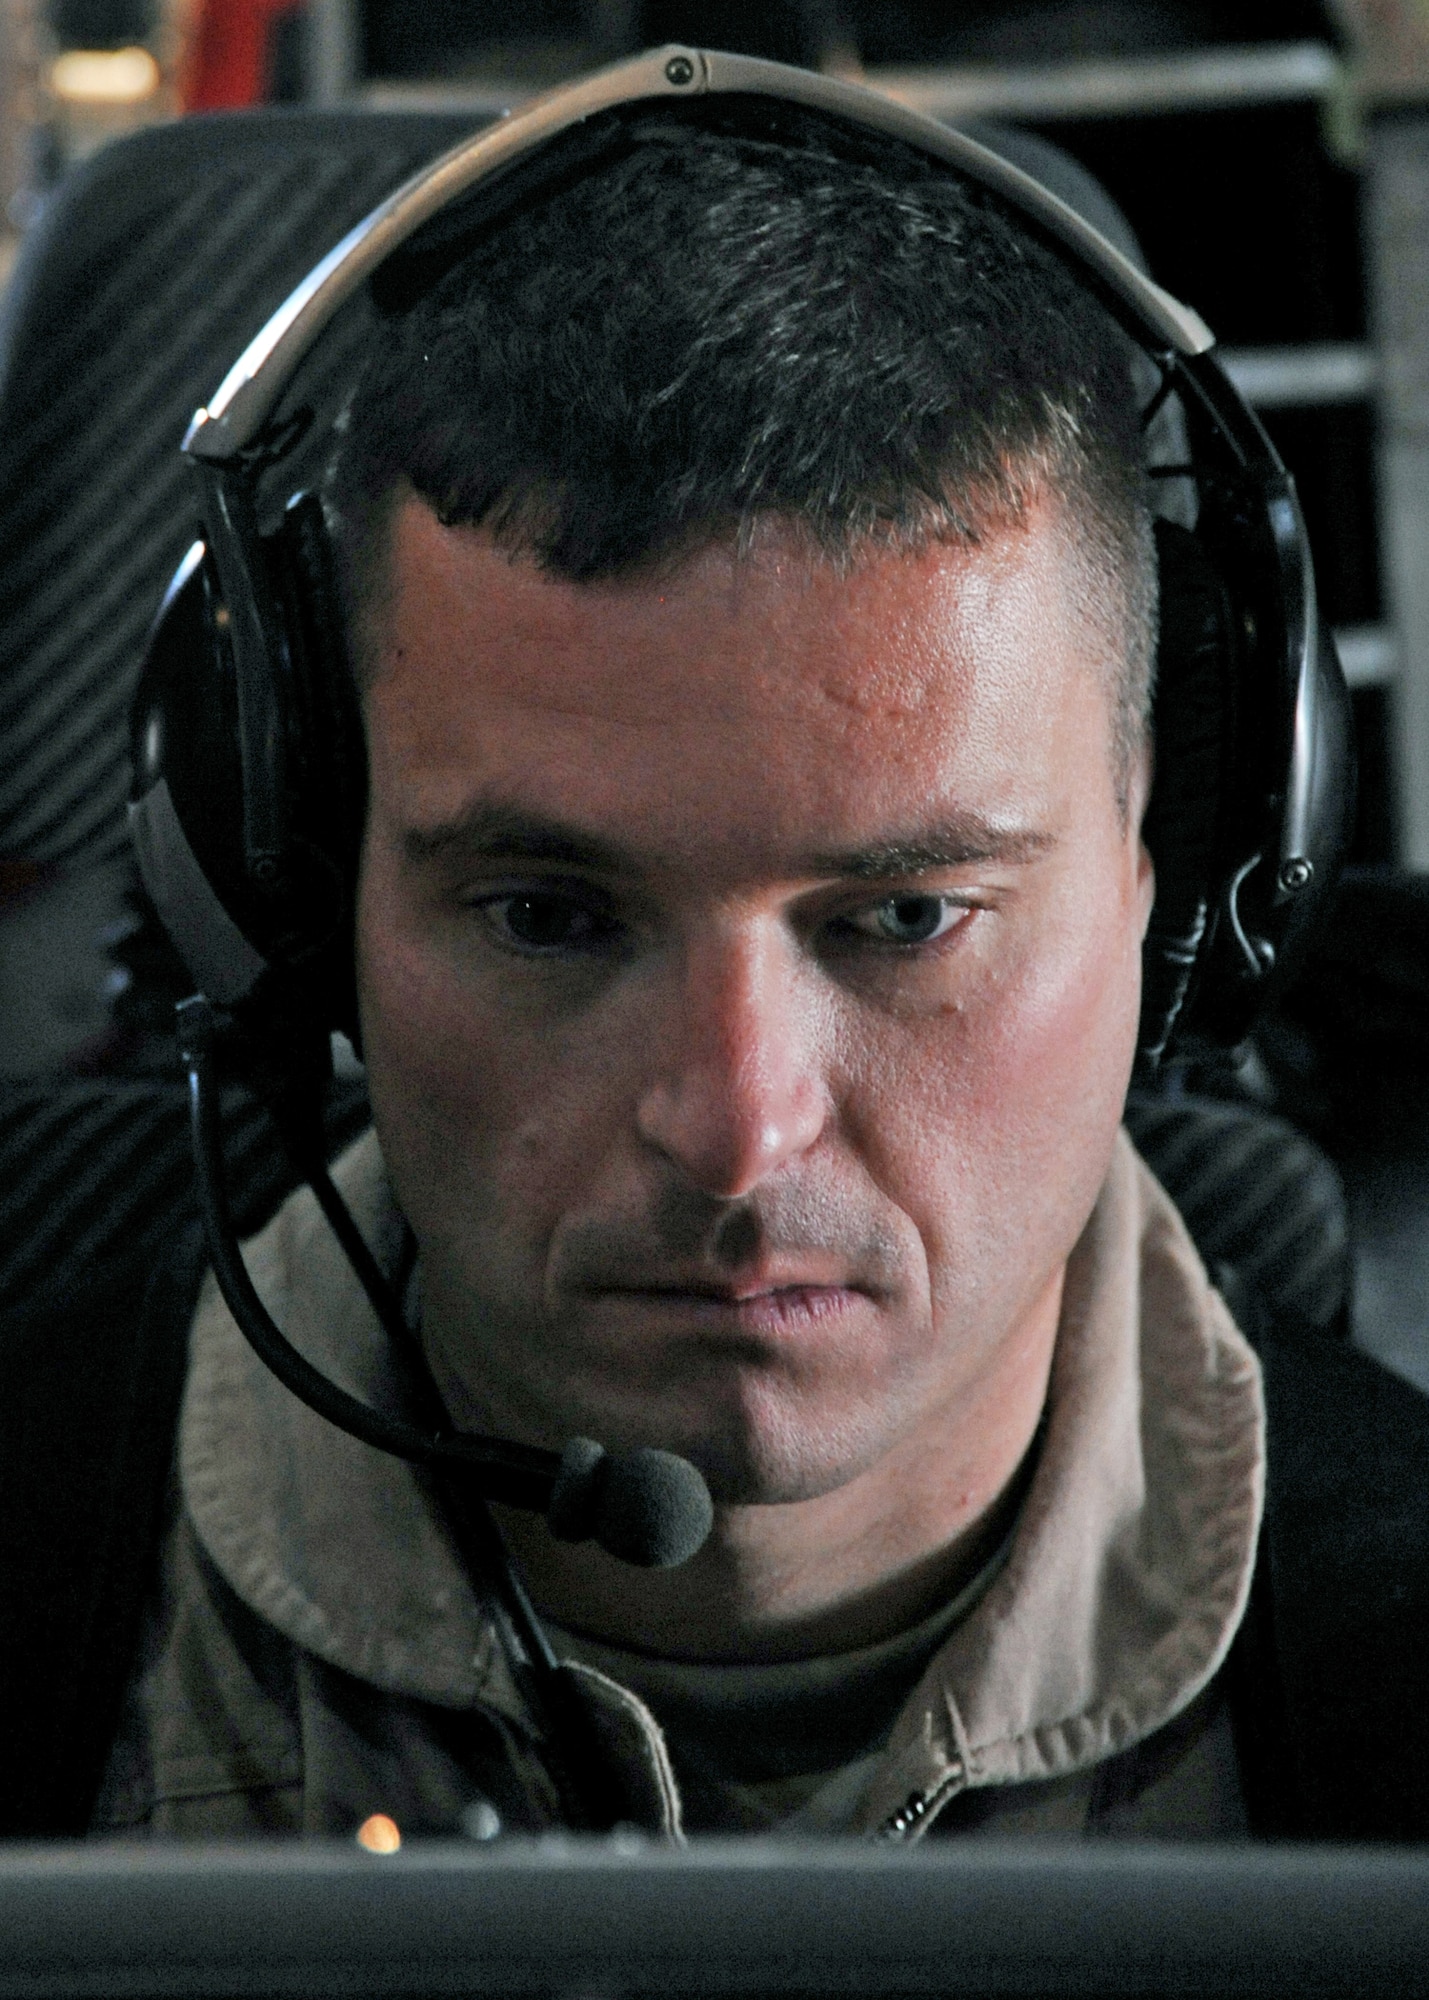 Capt. Jason Davis prepares for a joint airborne battle staff detachment mission on a C-130 Hercules Nov. 24, 2009. The JABS is a joint operation focused on providing airborne communications support to ground forces. Captain Davis is the 777th Expeditionary Airlift Squadron mission commander. (U.S. Air Force photo/Senior Airman Christopher Hubenthal)